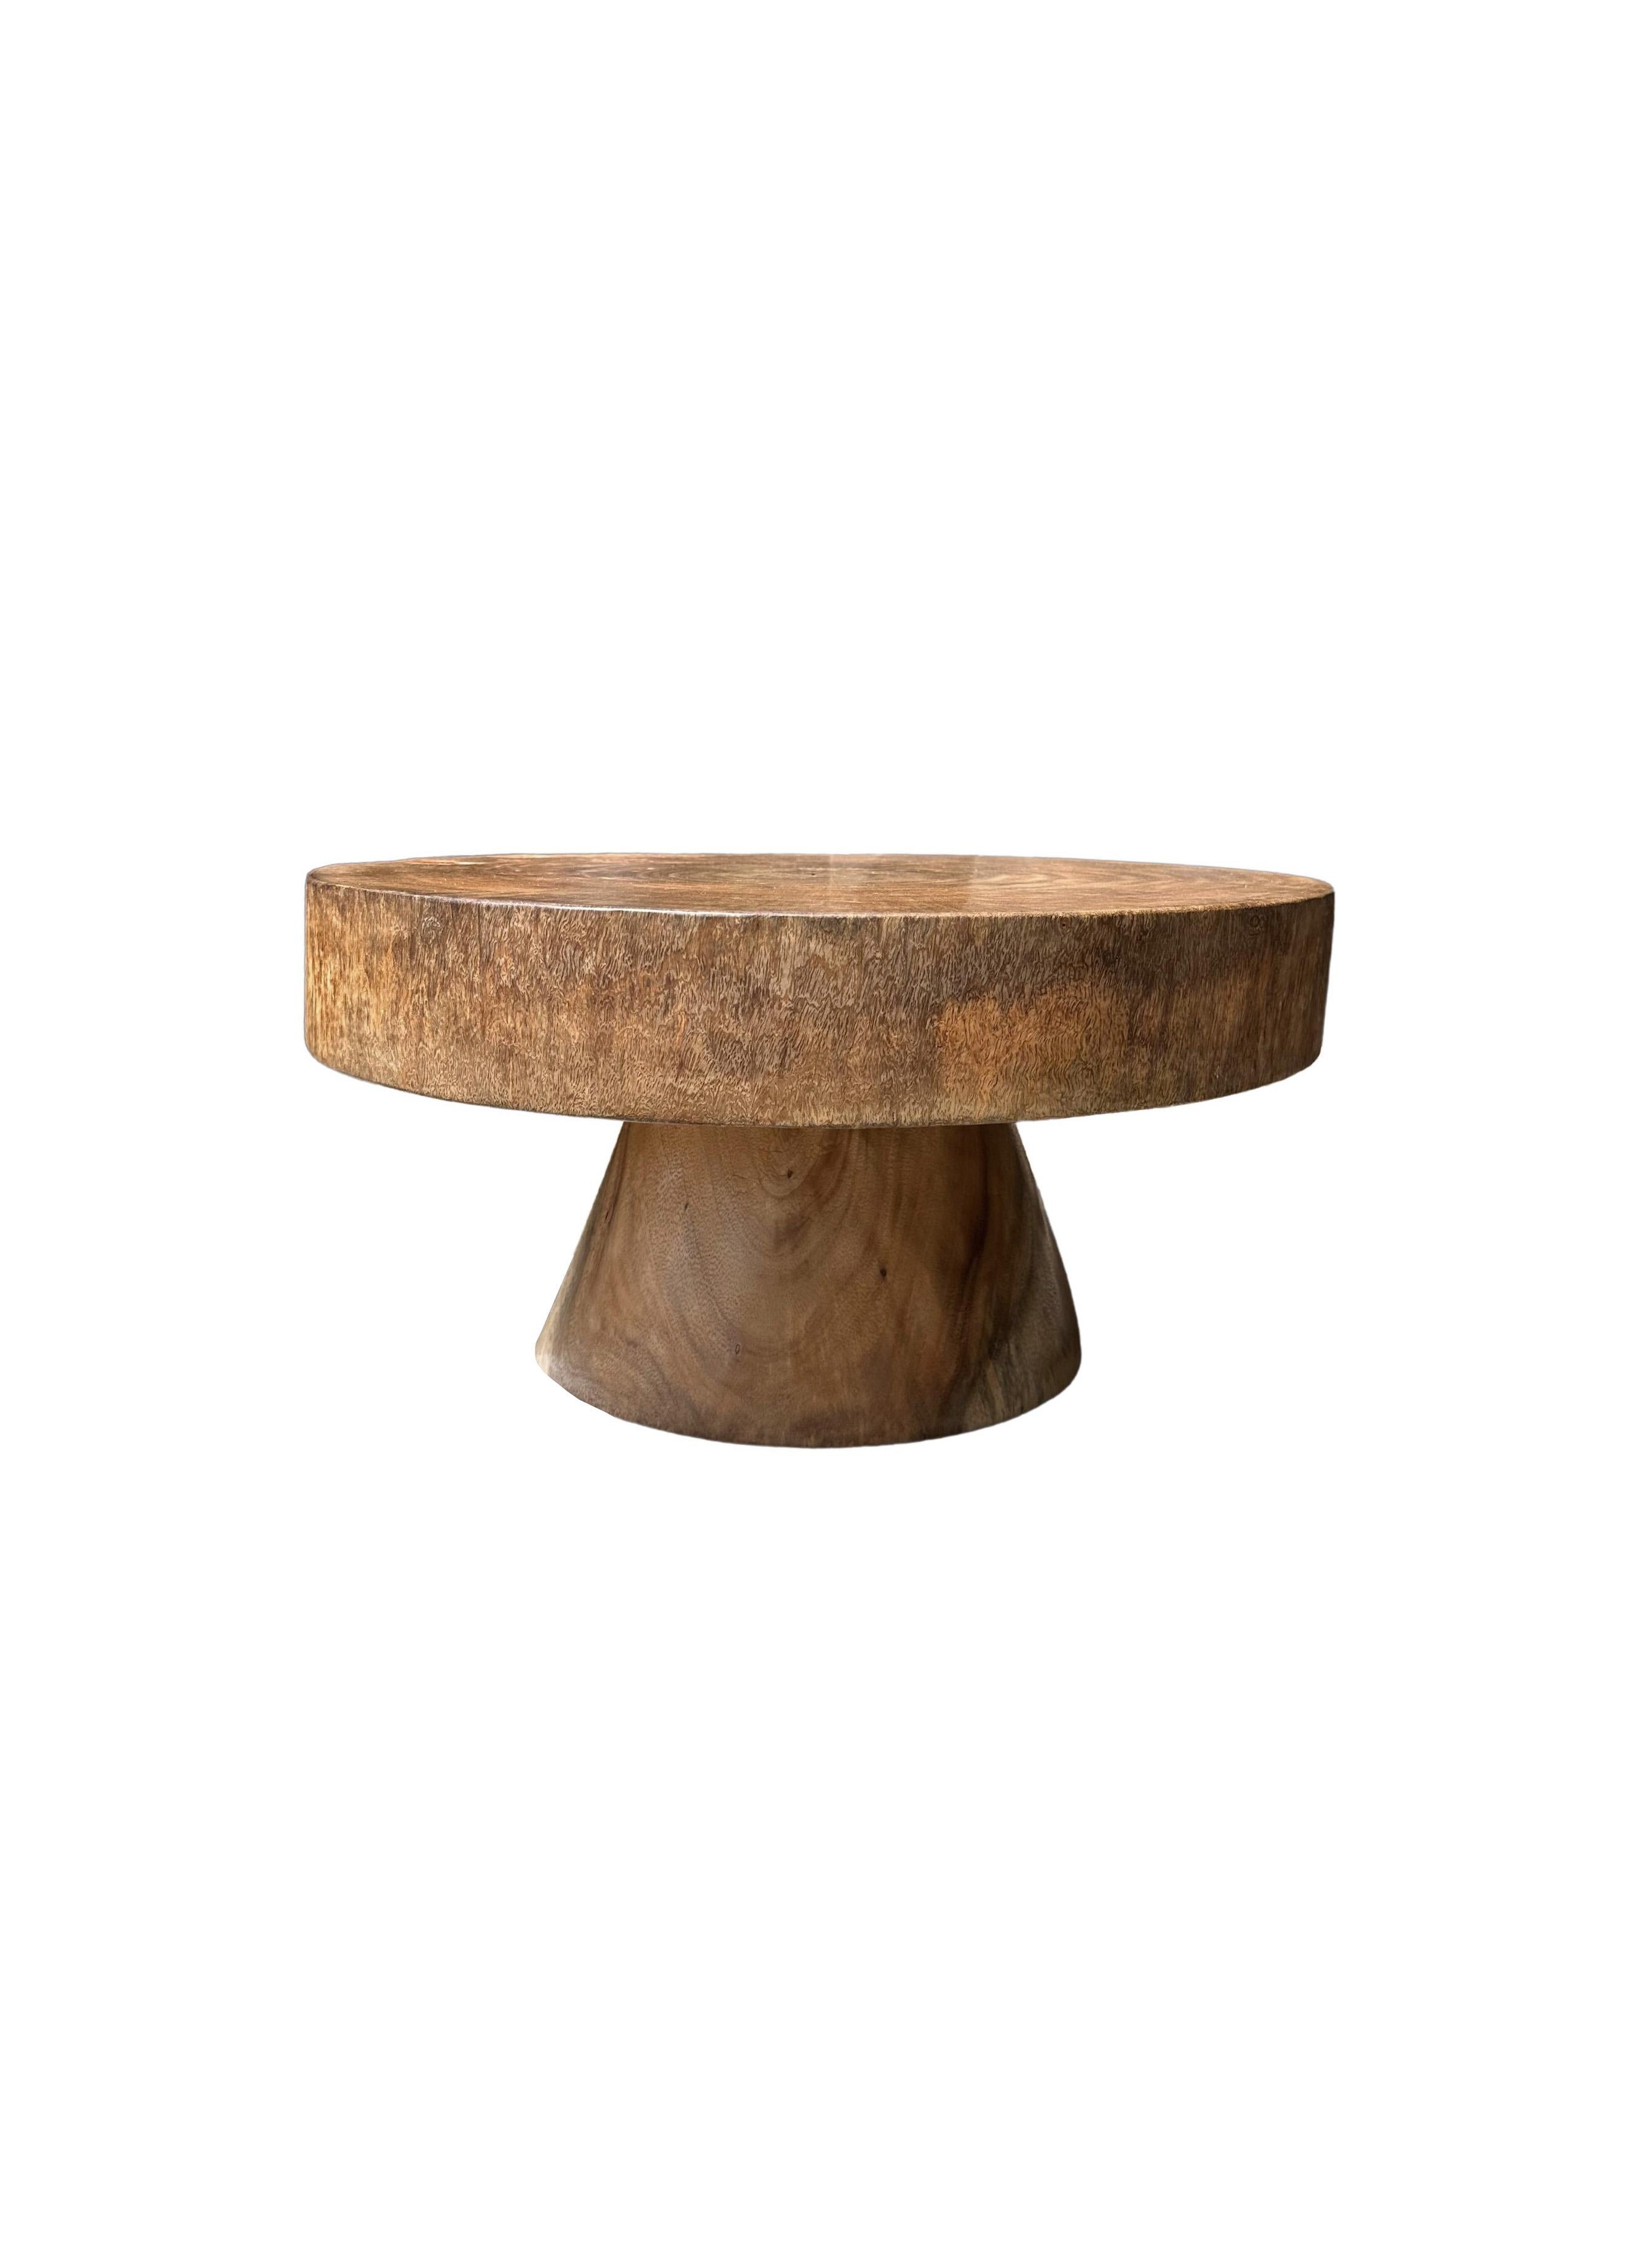 A wonderfully sculptural round side table featuring a natural finish. Its neutral pigment and subtle wood texture makes it perfect for any space. A uniquely sculptural and versatile piece certain to invoke conversation. This table was crafted from